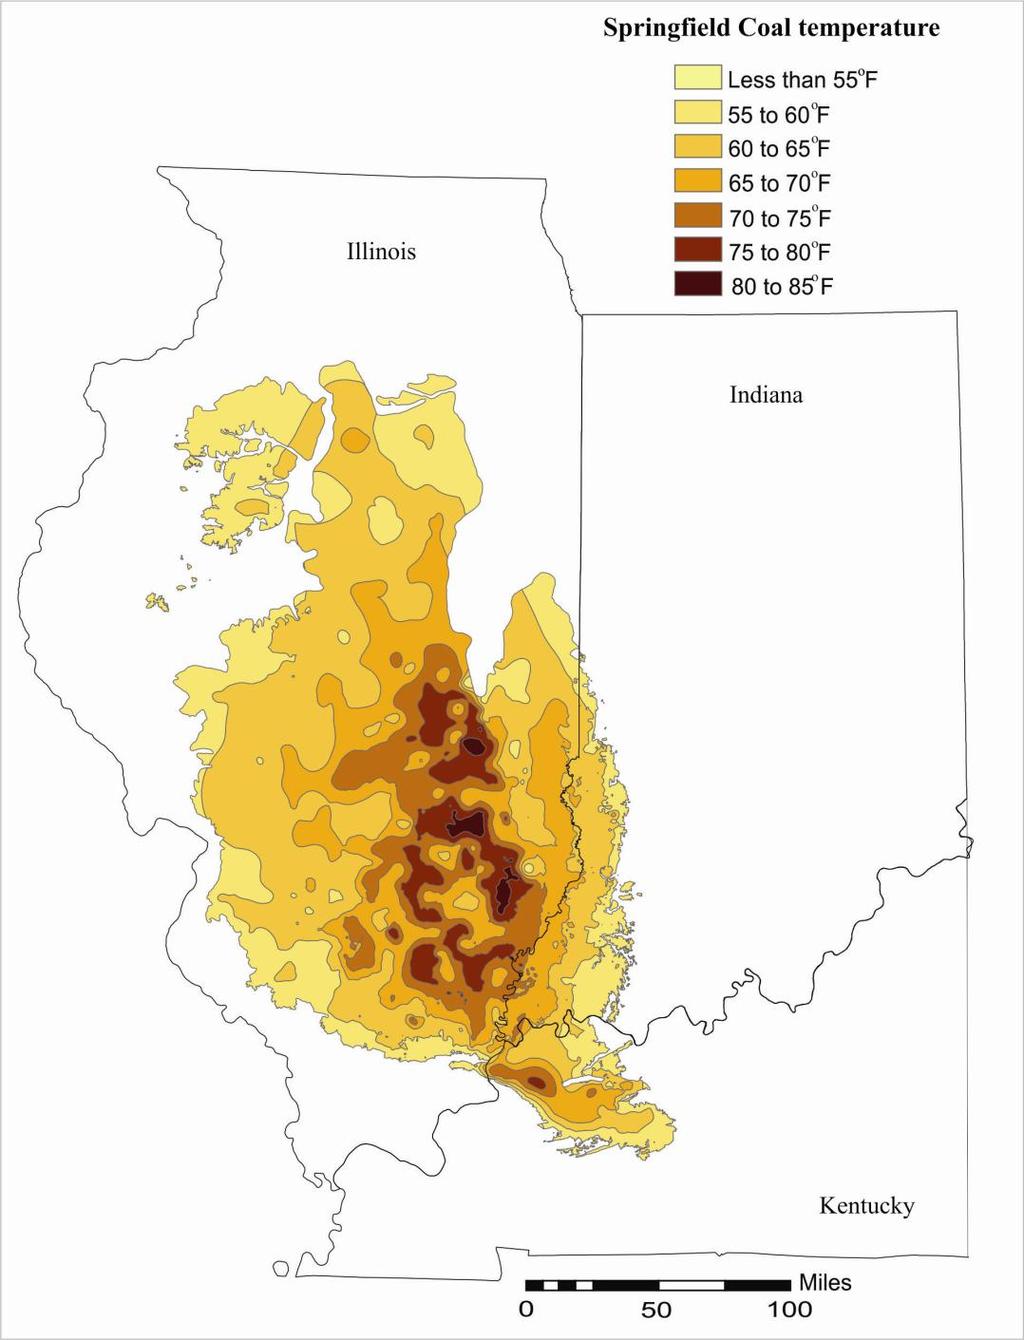 Illinois Basin coal beds have reservoir temperatures ranging from less than 12ºC (55ºF) to a little more than 26ºC (80ºF) in isolated areas in Illinois, where